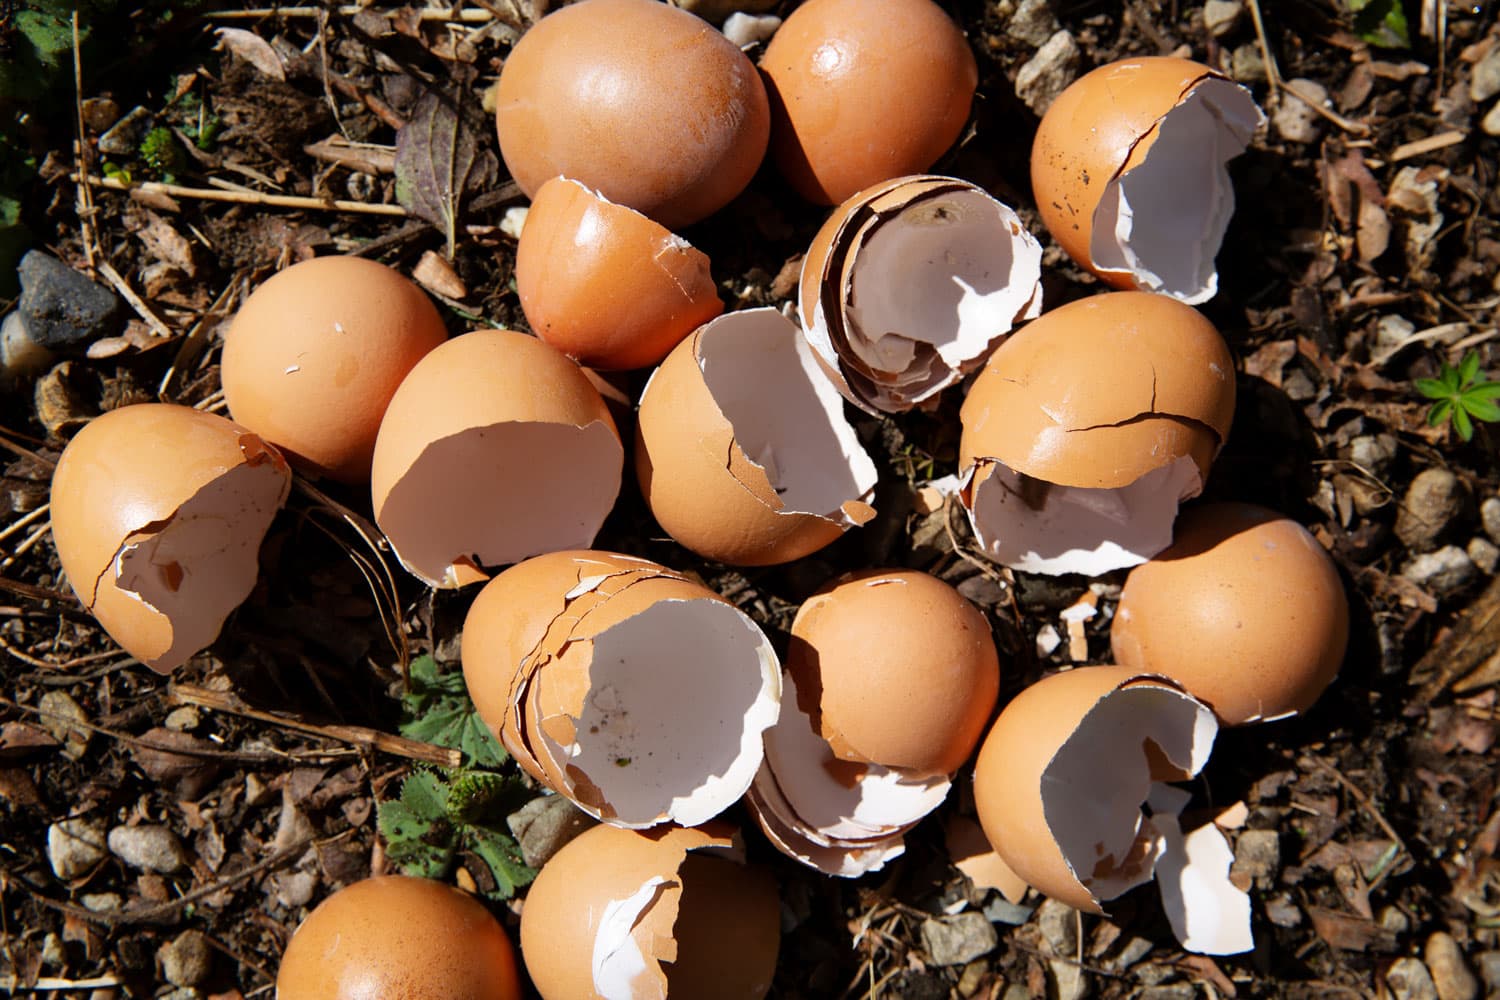 Eggshells lying on the ground in a garden.